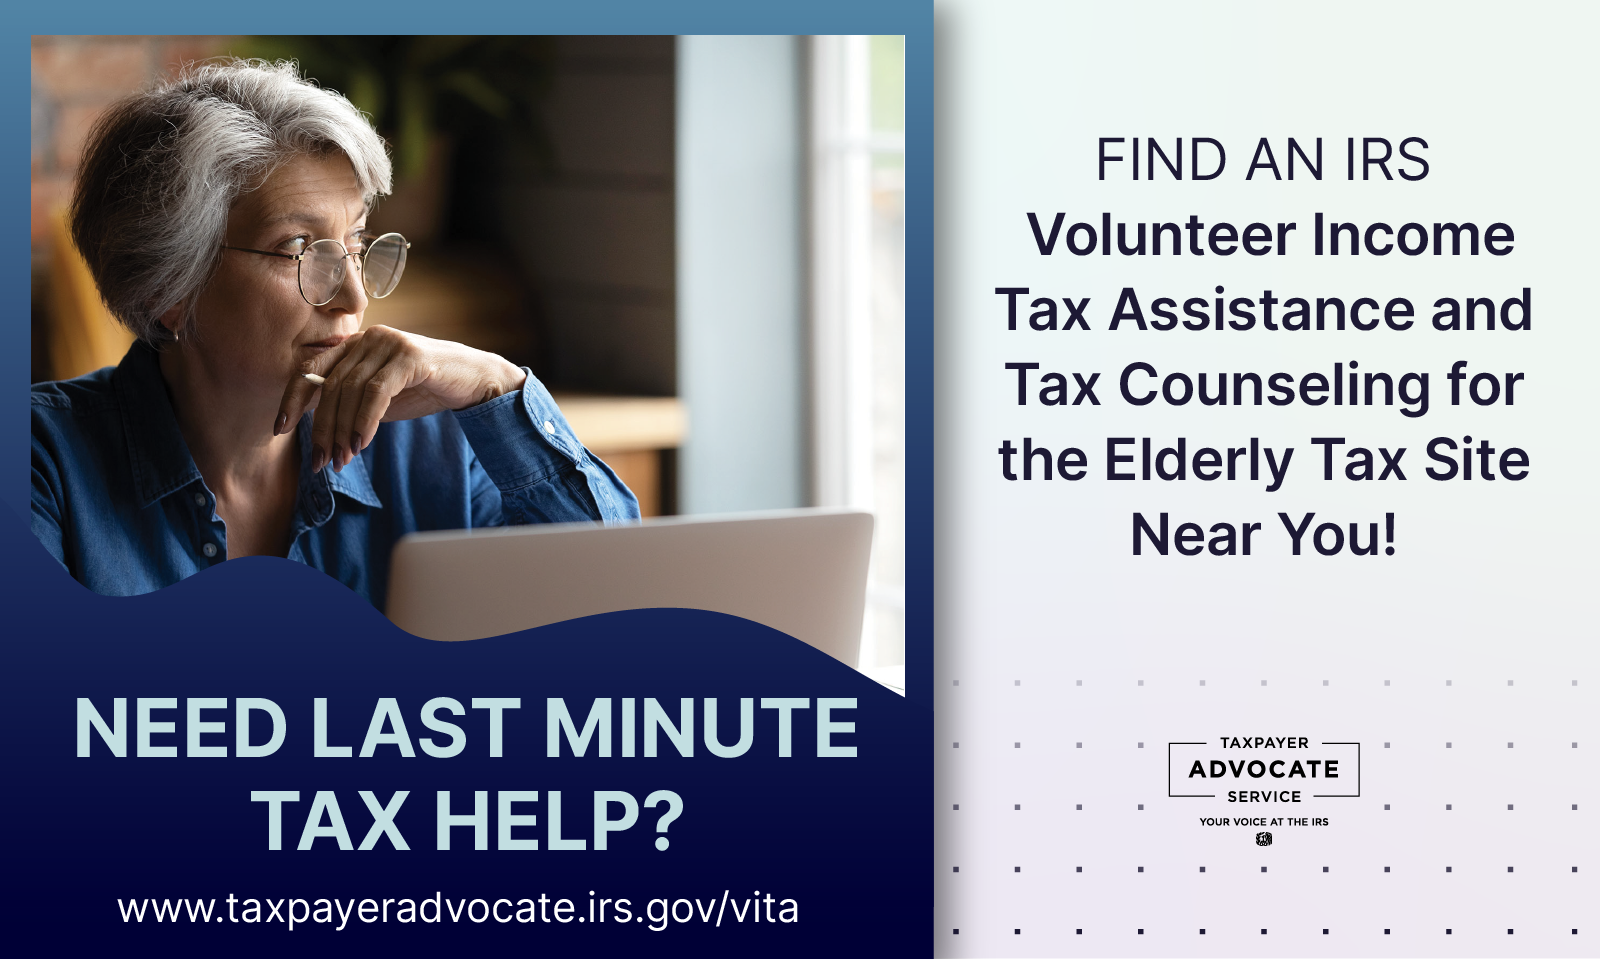 Need last minute tax help? Find an IRS Volunteer Income Tax Assistance and Tax Counseling for the Elderly tax site near you.